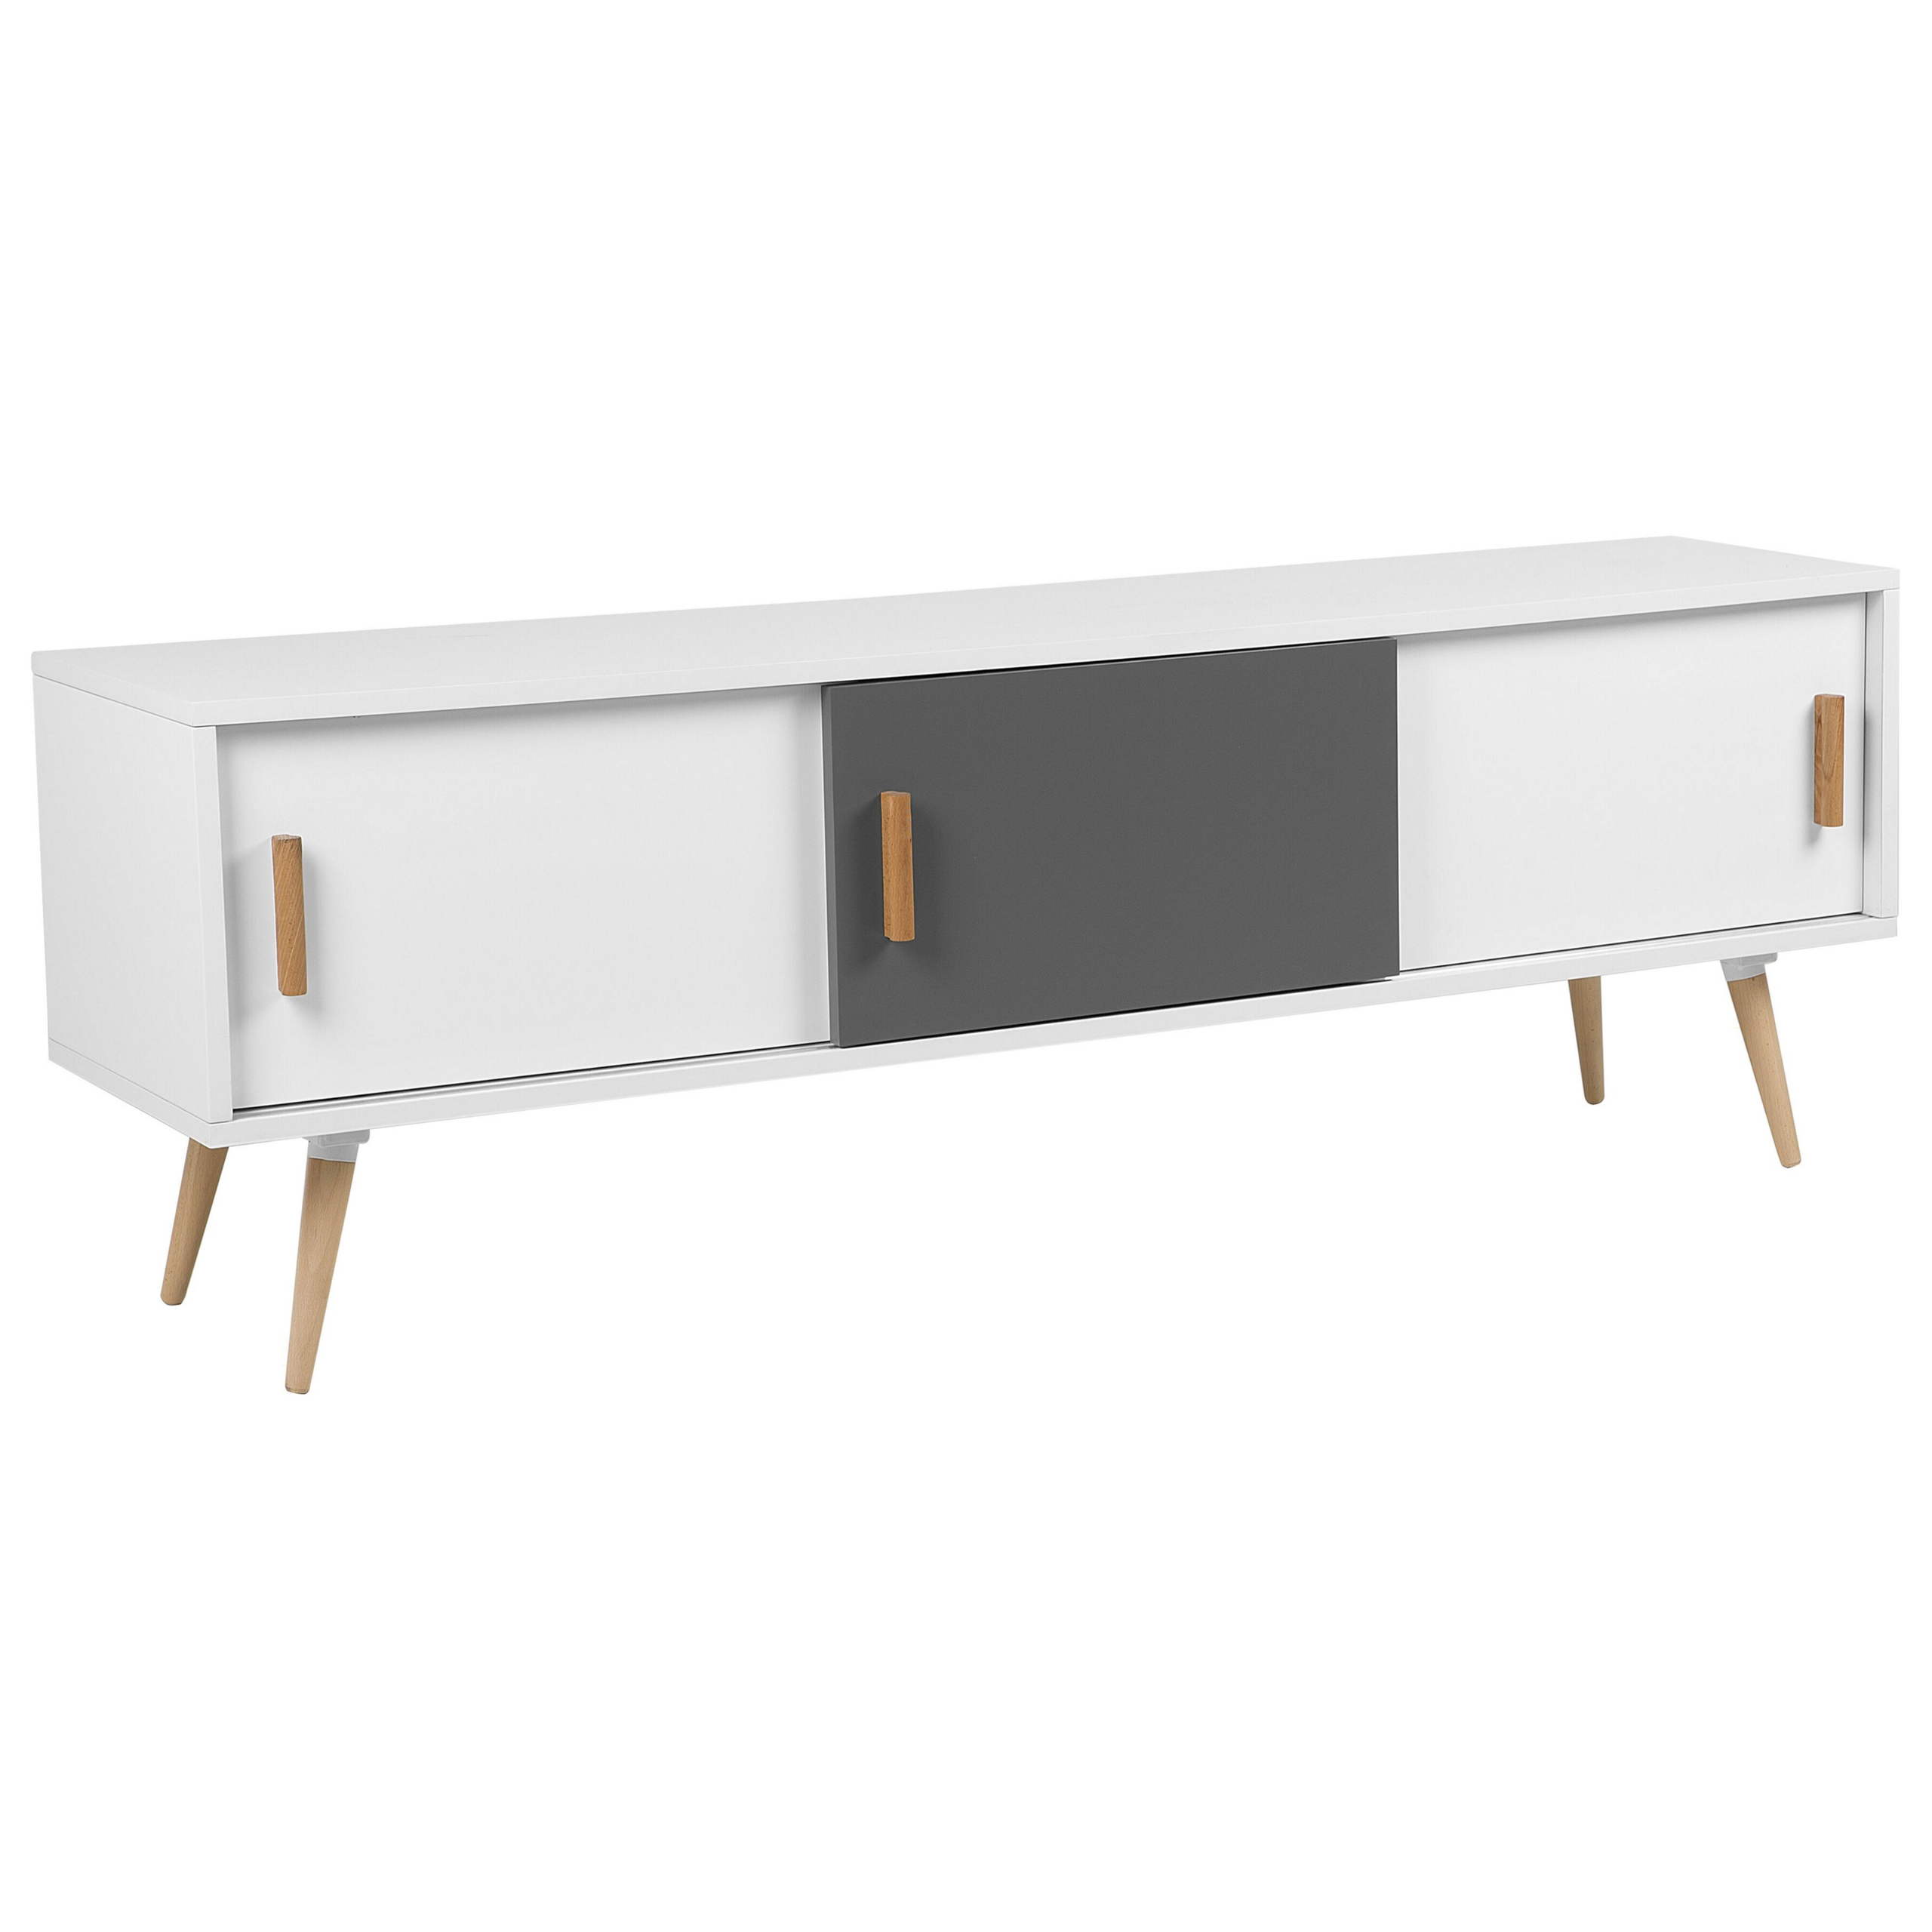 Beliani Sideboard White and Grey with Wooden Legs 3 Sliding Doors Material:MDF Size:40x55x160